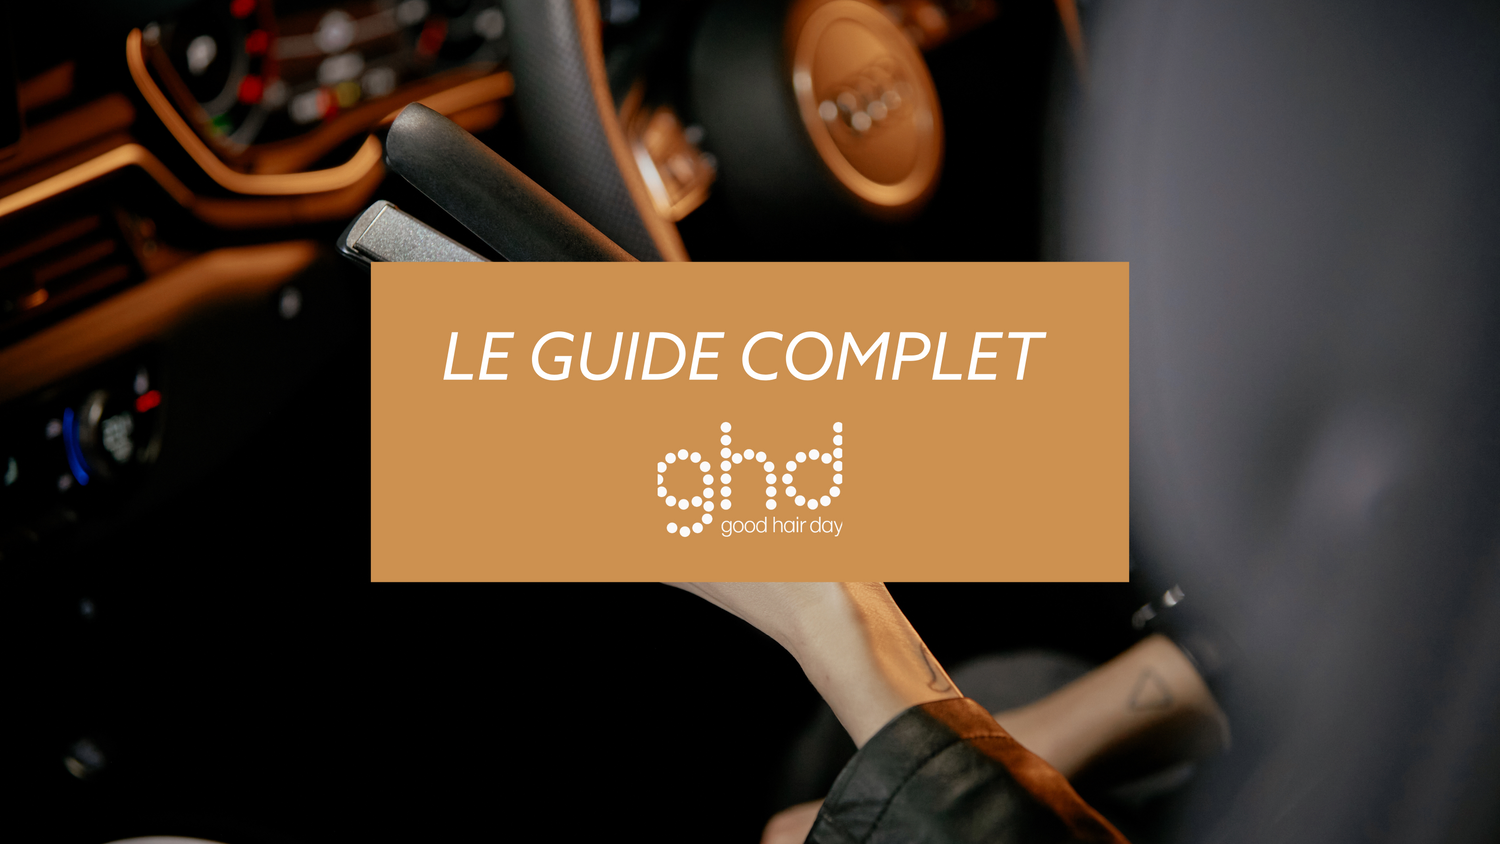 GHD : le guide complet